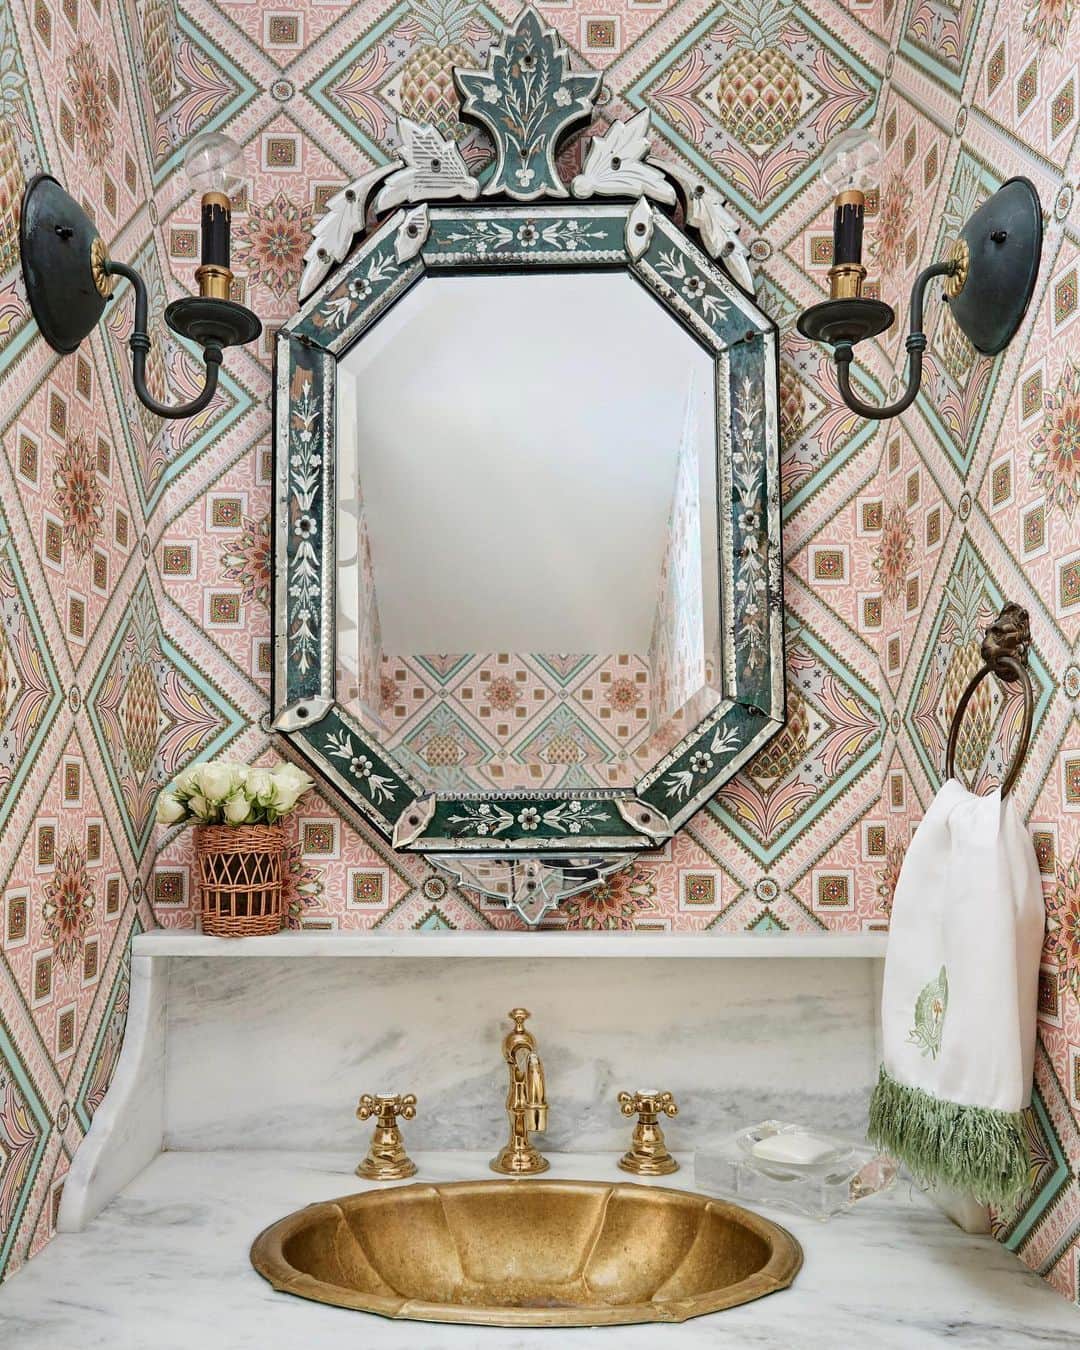 Roxy Sowlaty Interiorsのインスタグラム：「Our powder room 🍍 @archdigest  @gucci wallpaper」